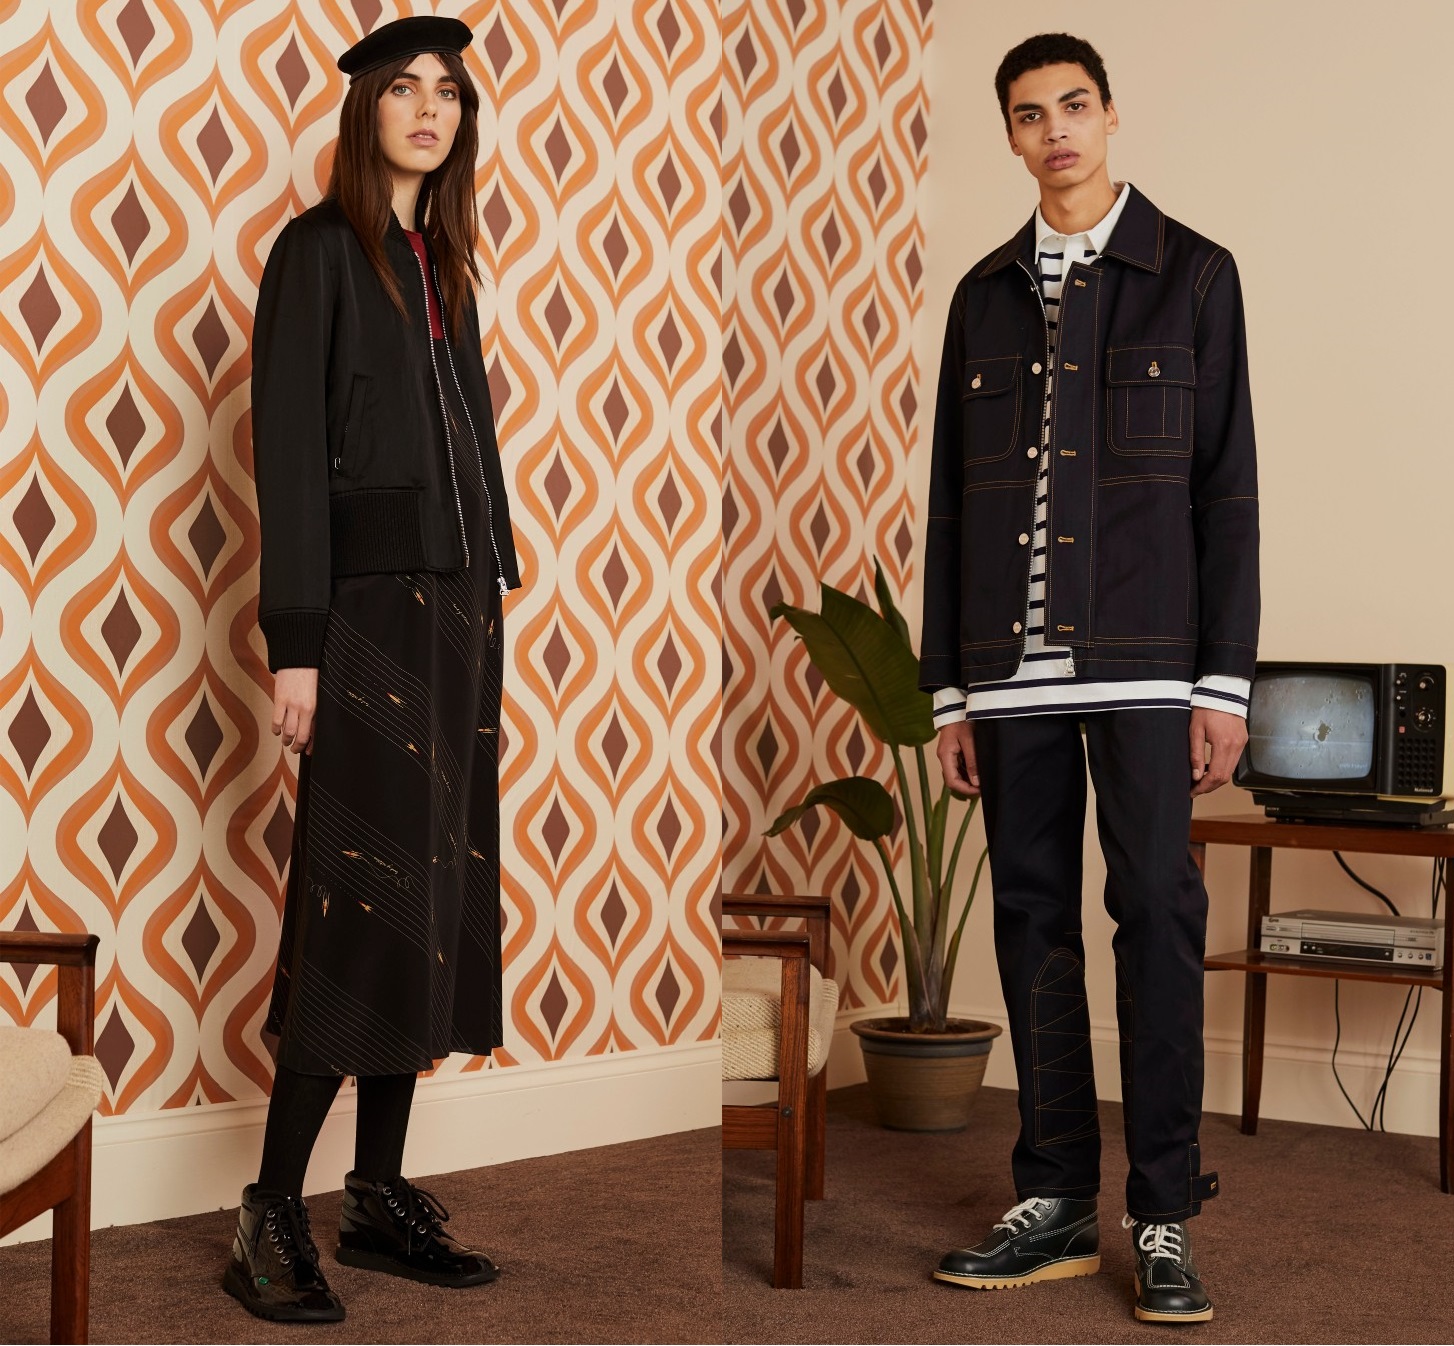 Band of Outsiders Autumn/Winter 2019 Collection